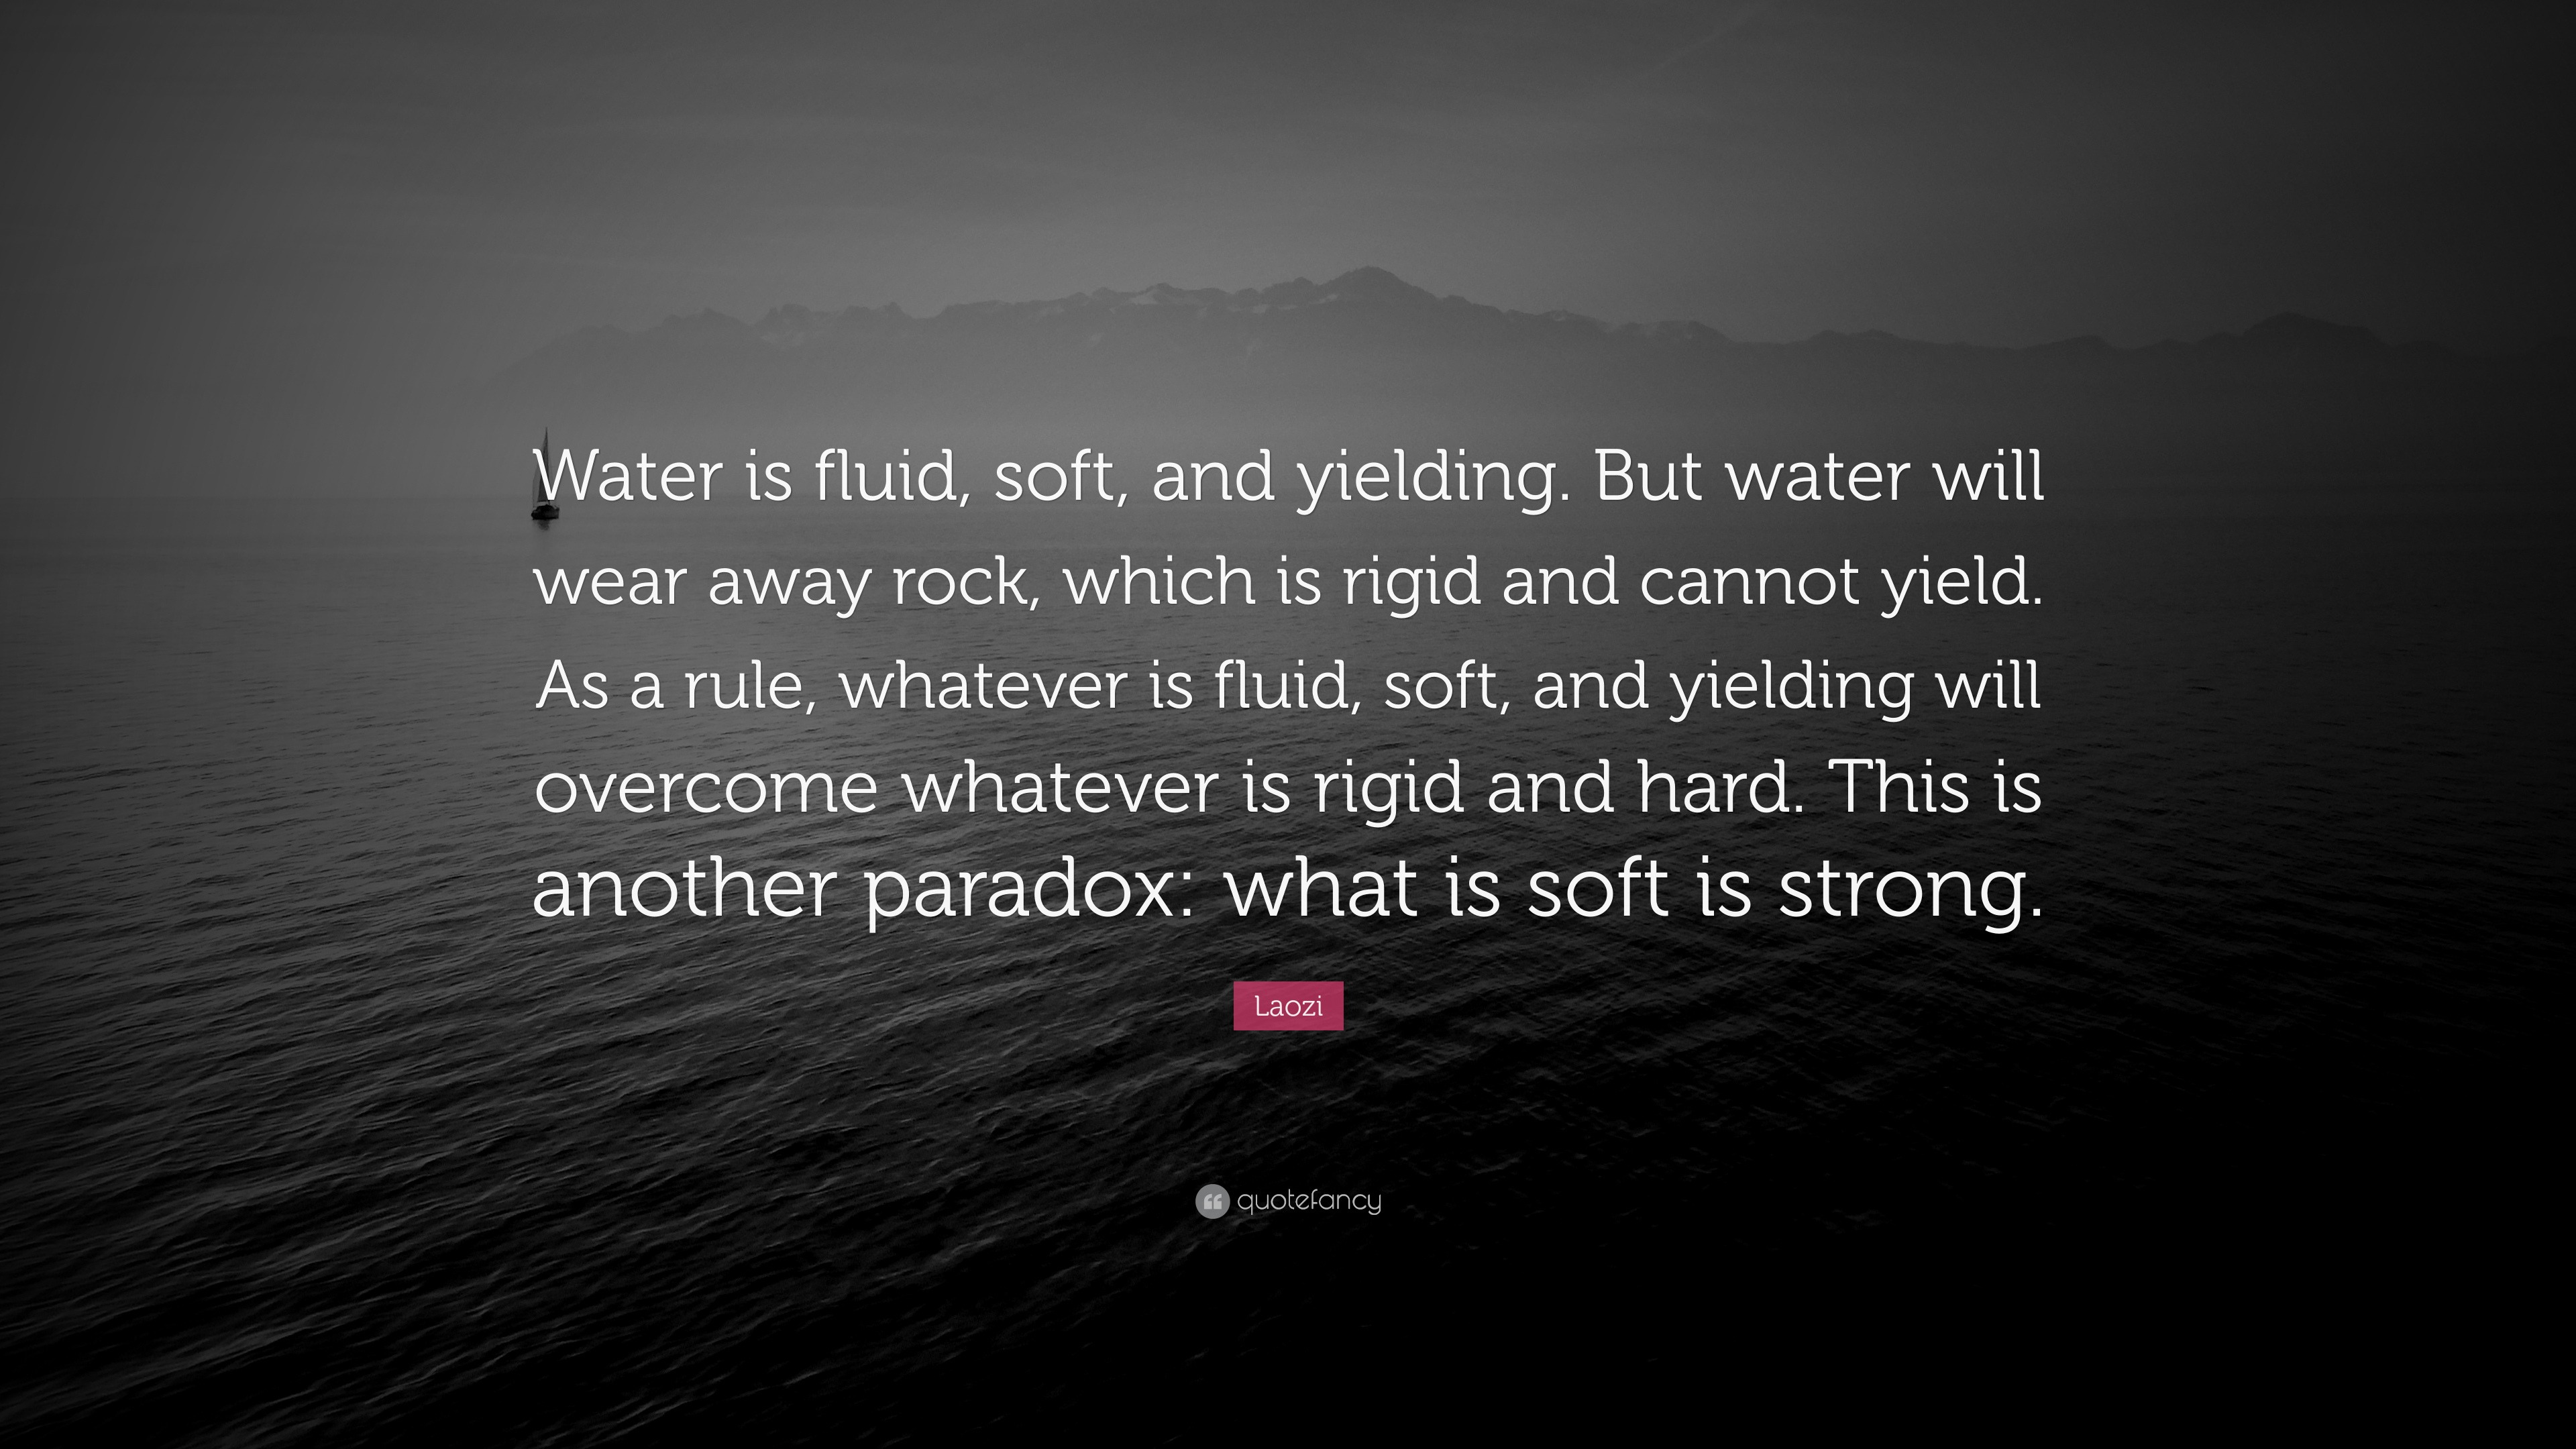 Laozi Quote: “Water is fluid, soft, and yielding. But water will wear ...